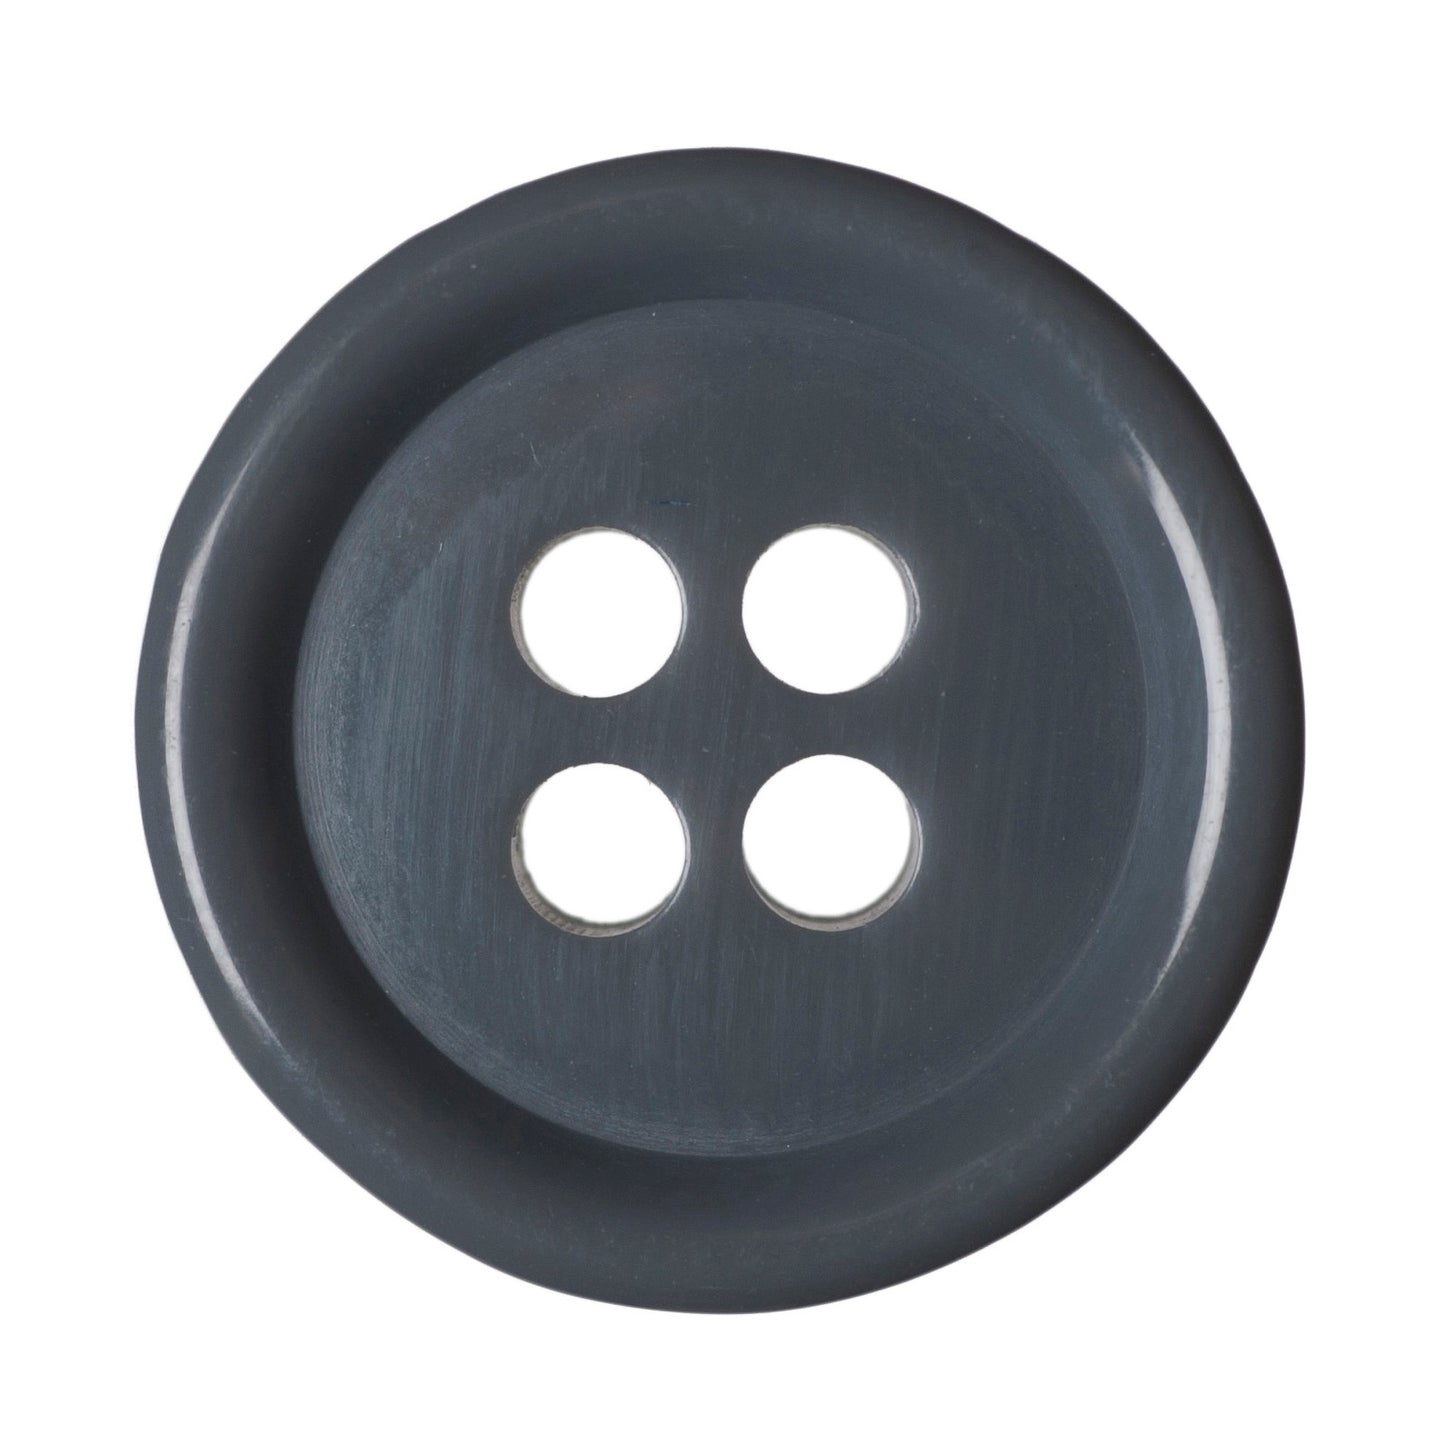 4 Hole Solid Jacket Button - 23mm - Grey [LB18.7]